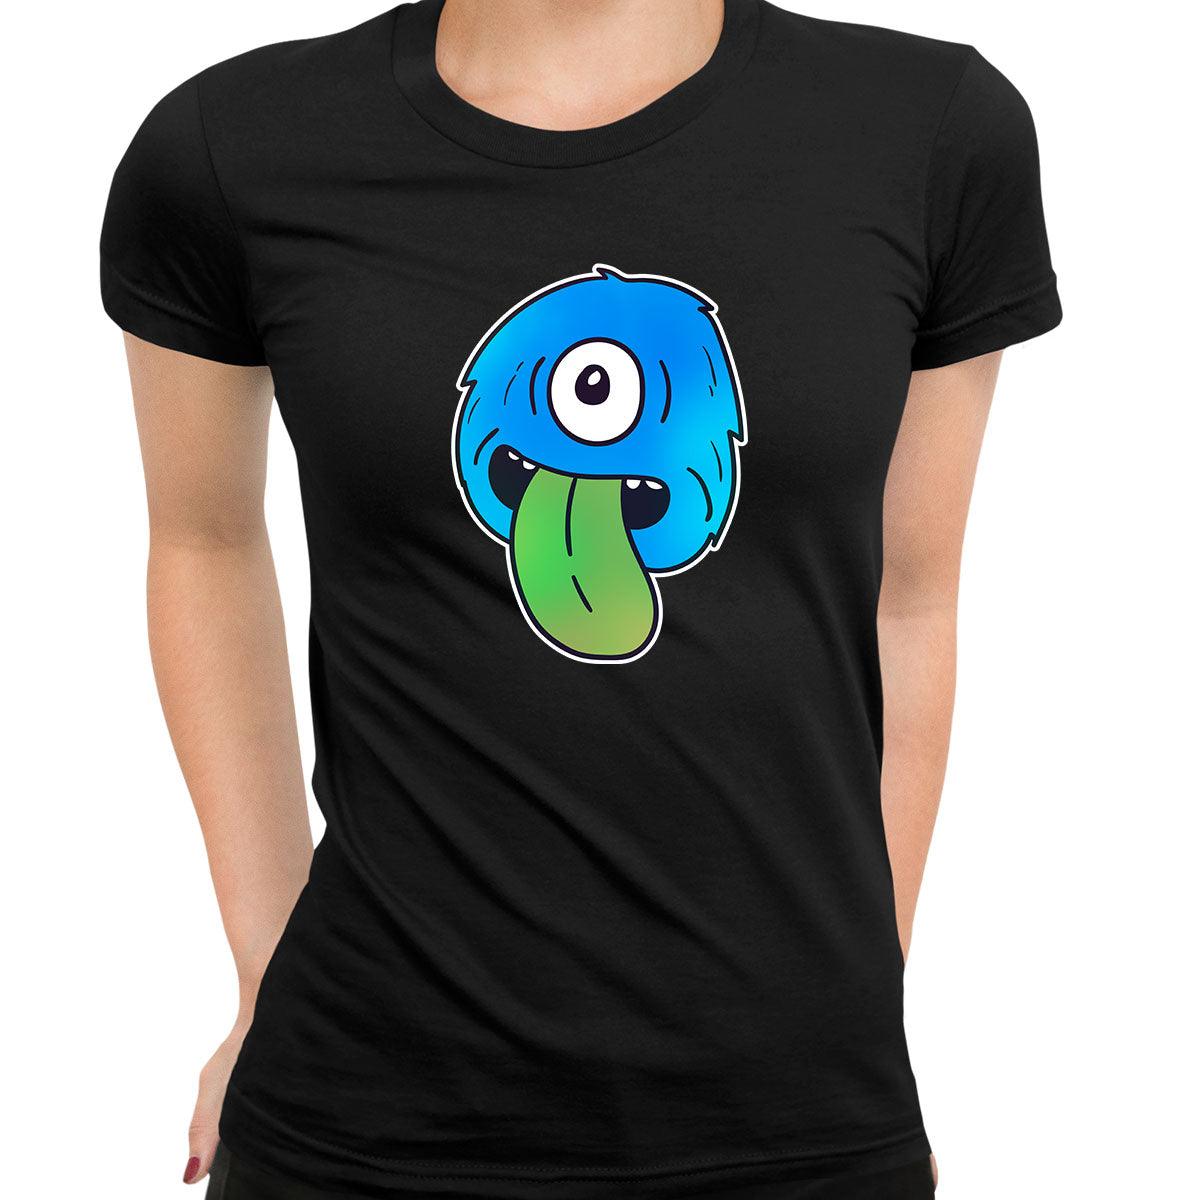 Cookie Monster Scary Eye Funny Gift Drawing Printed T-Shirt for Women - Kuzi Tees